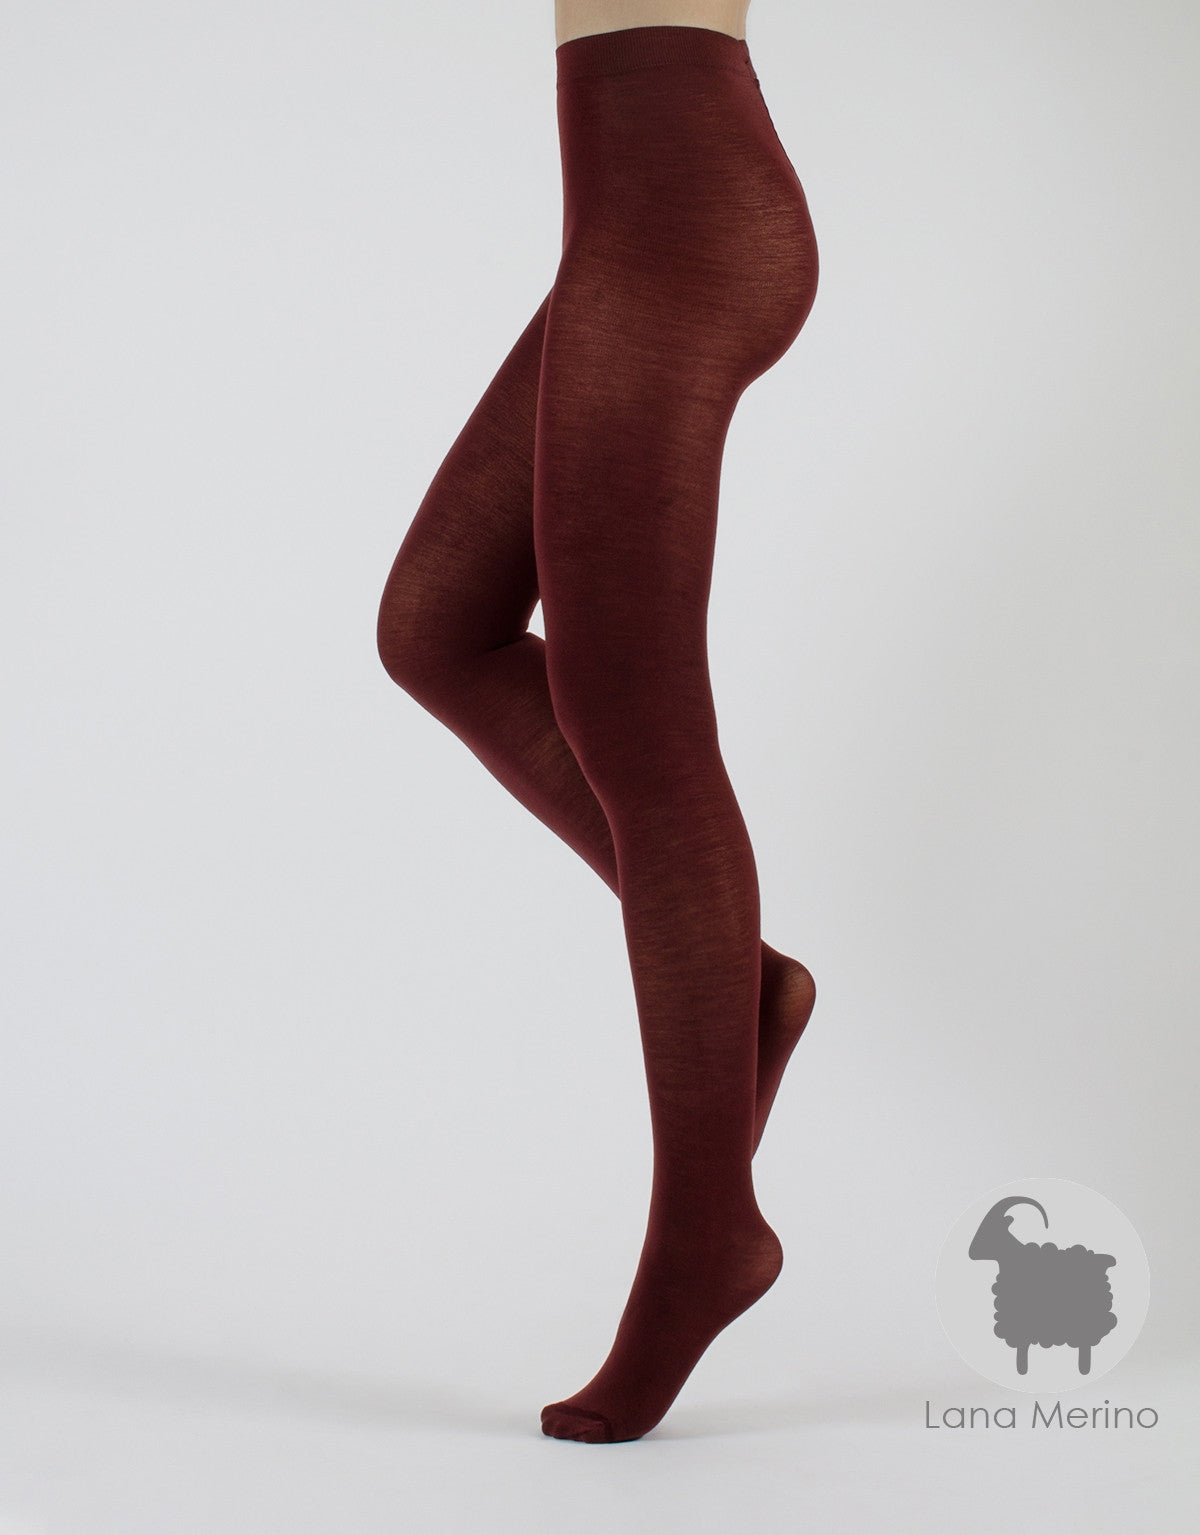 Calzitaly Wine Merino Tights - Light and warm knitted thermal tights with deep waistband and gusset, perfect for cold Winters.